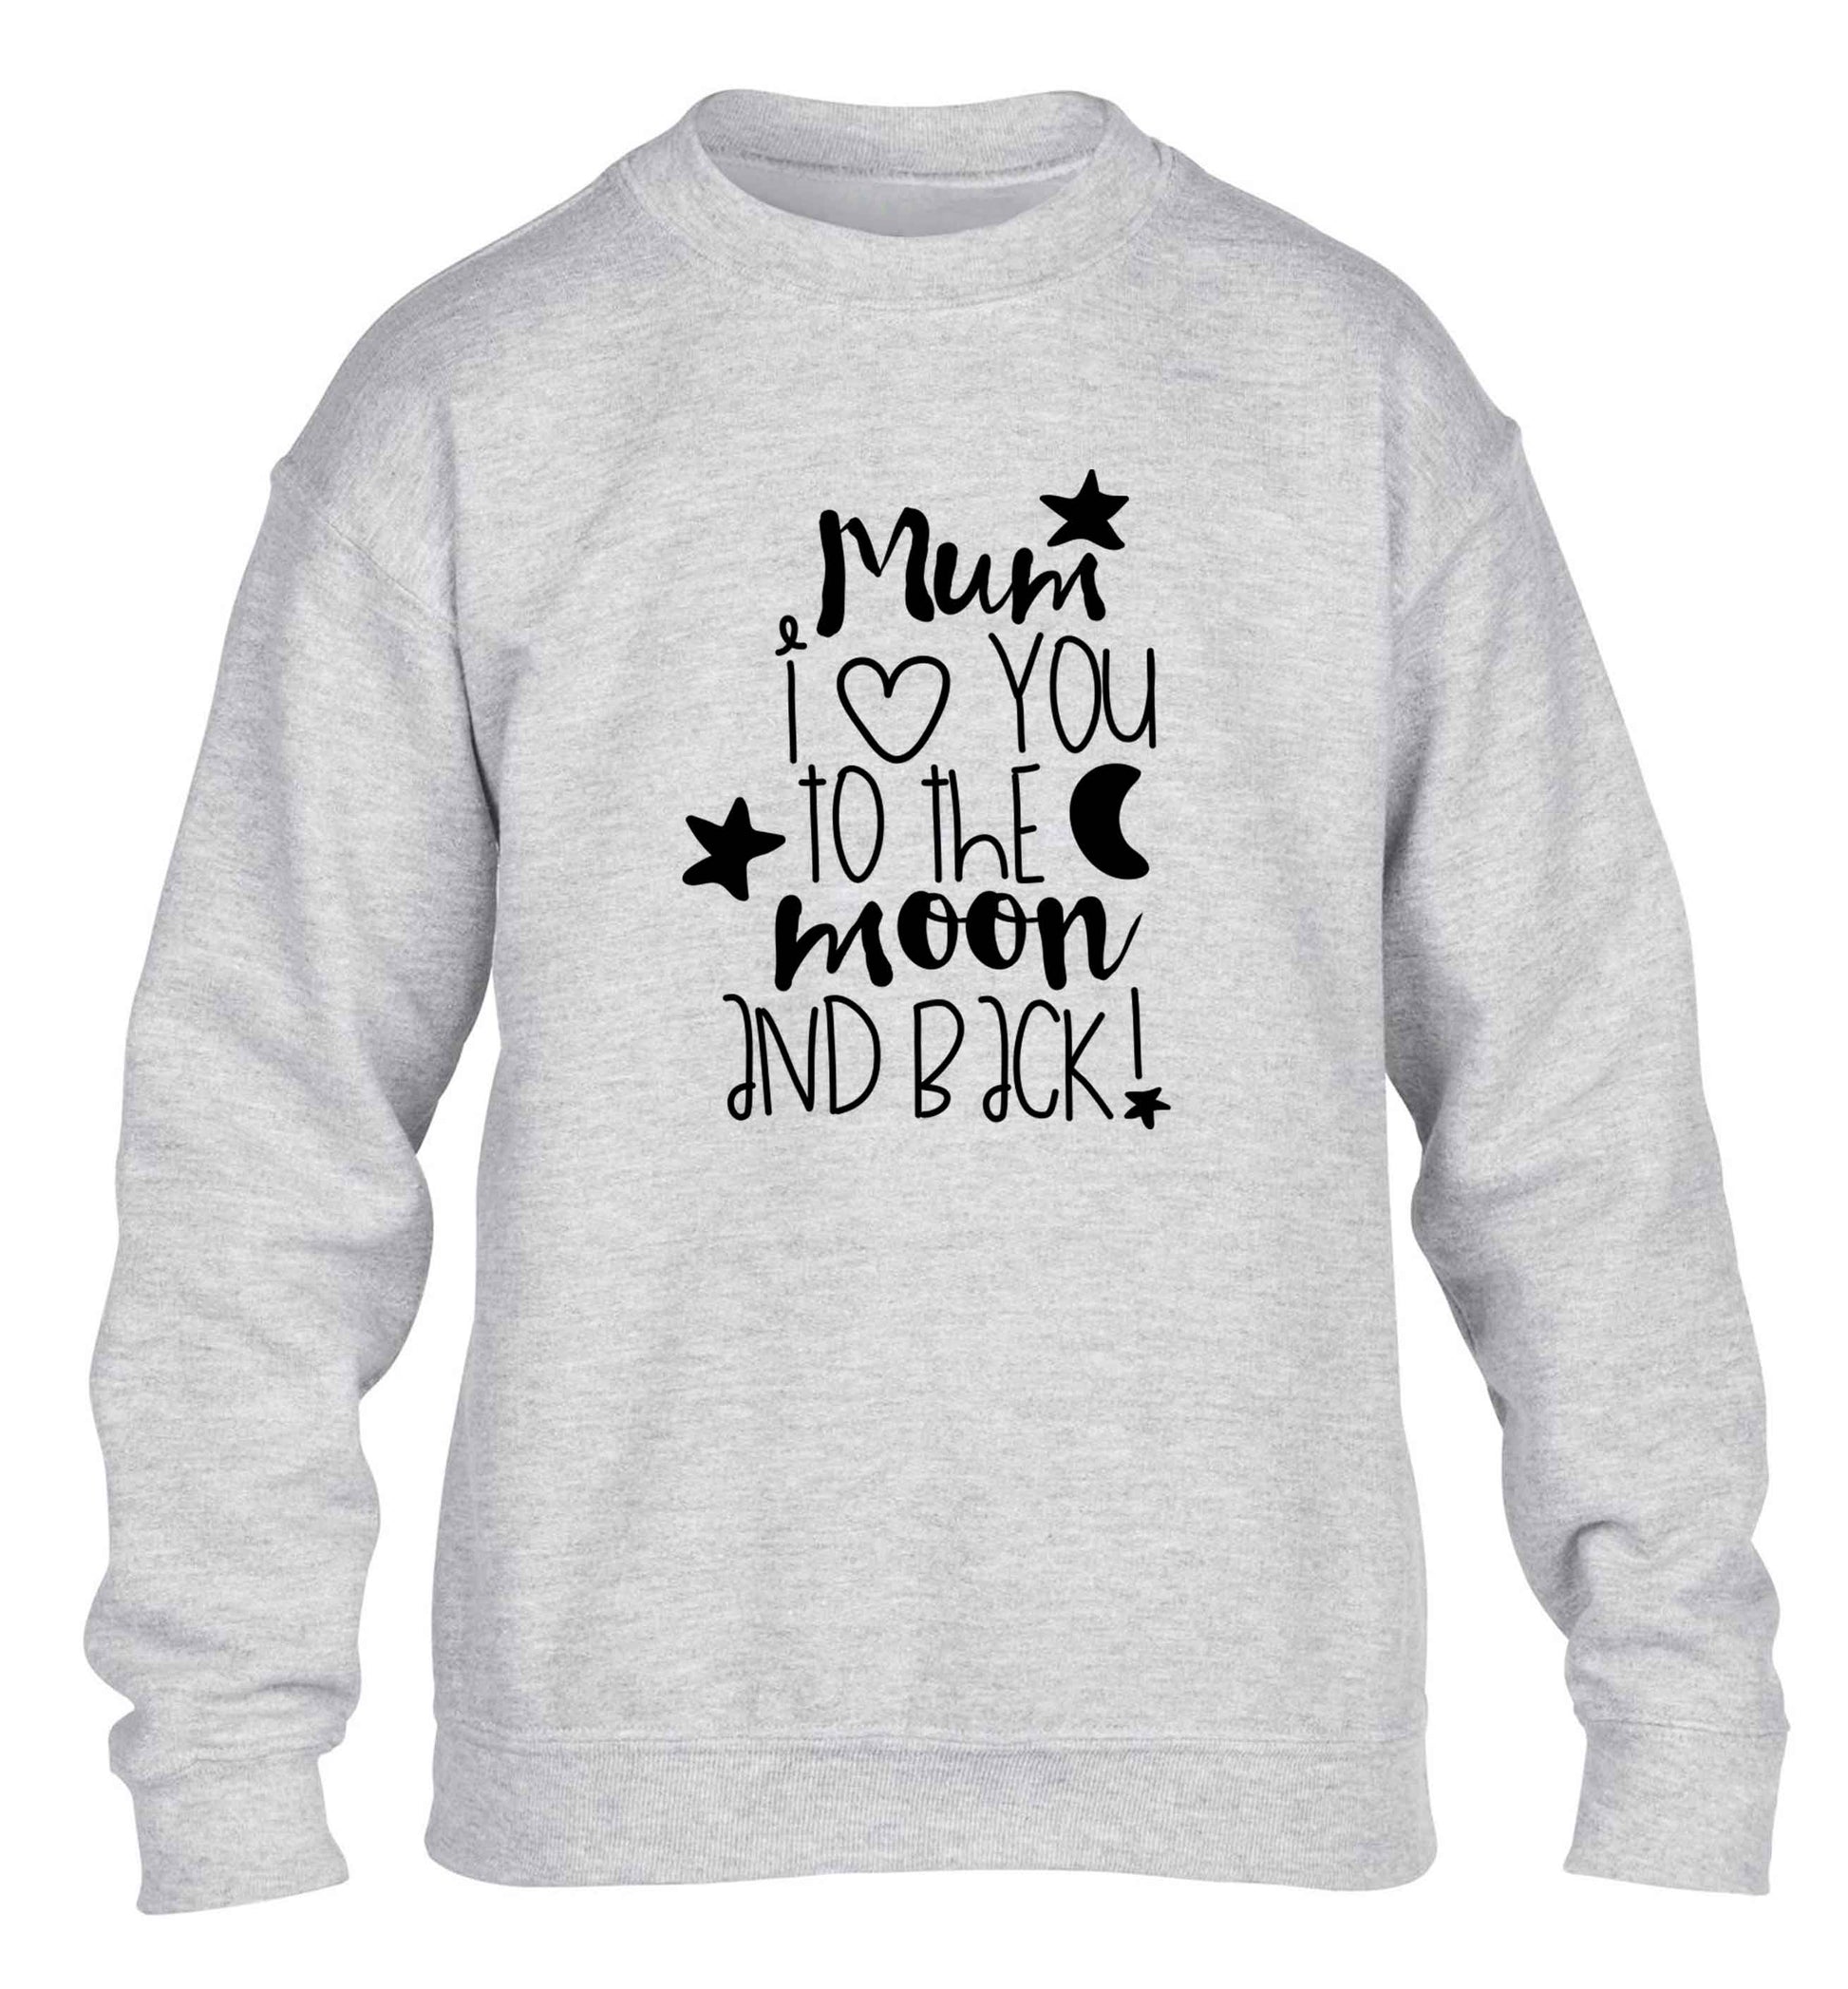 Mum I love you to the moon and back children's grey sweater 12-13 Years